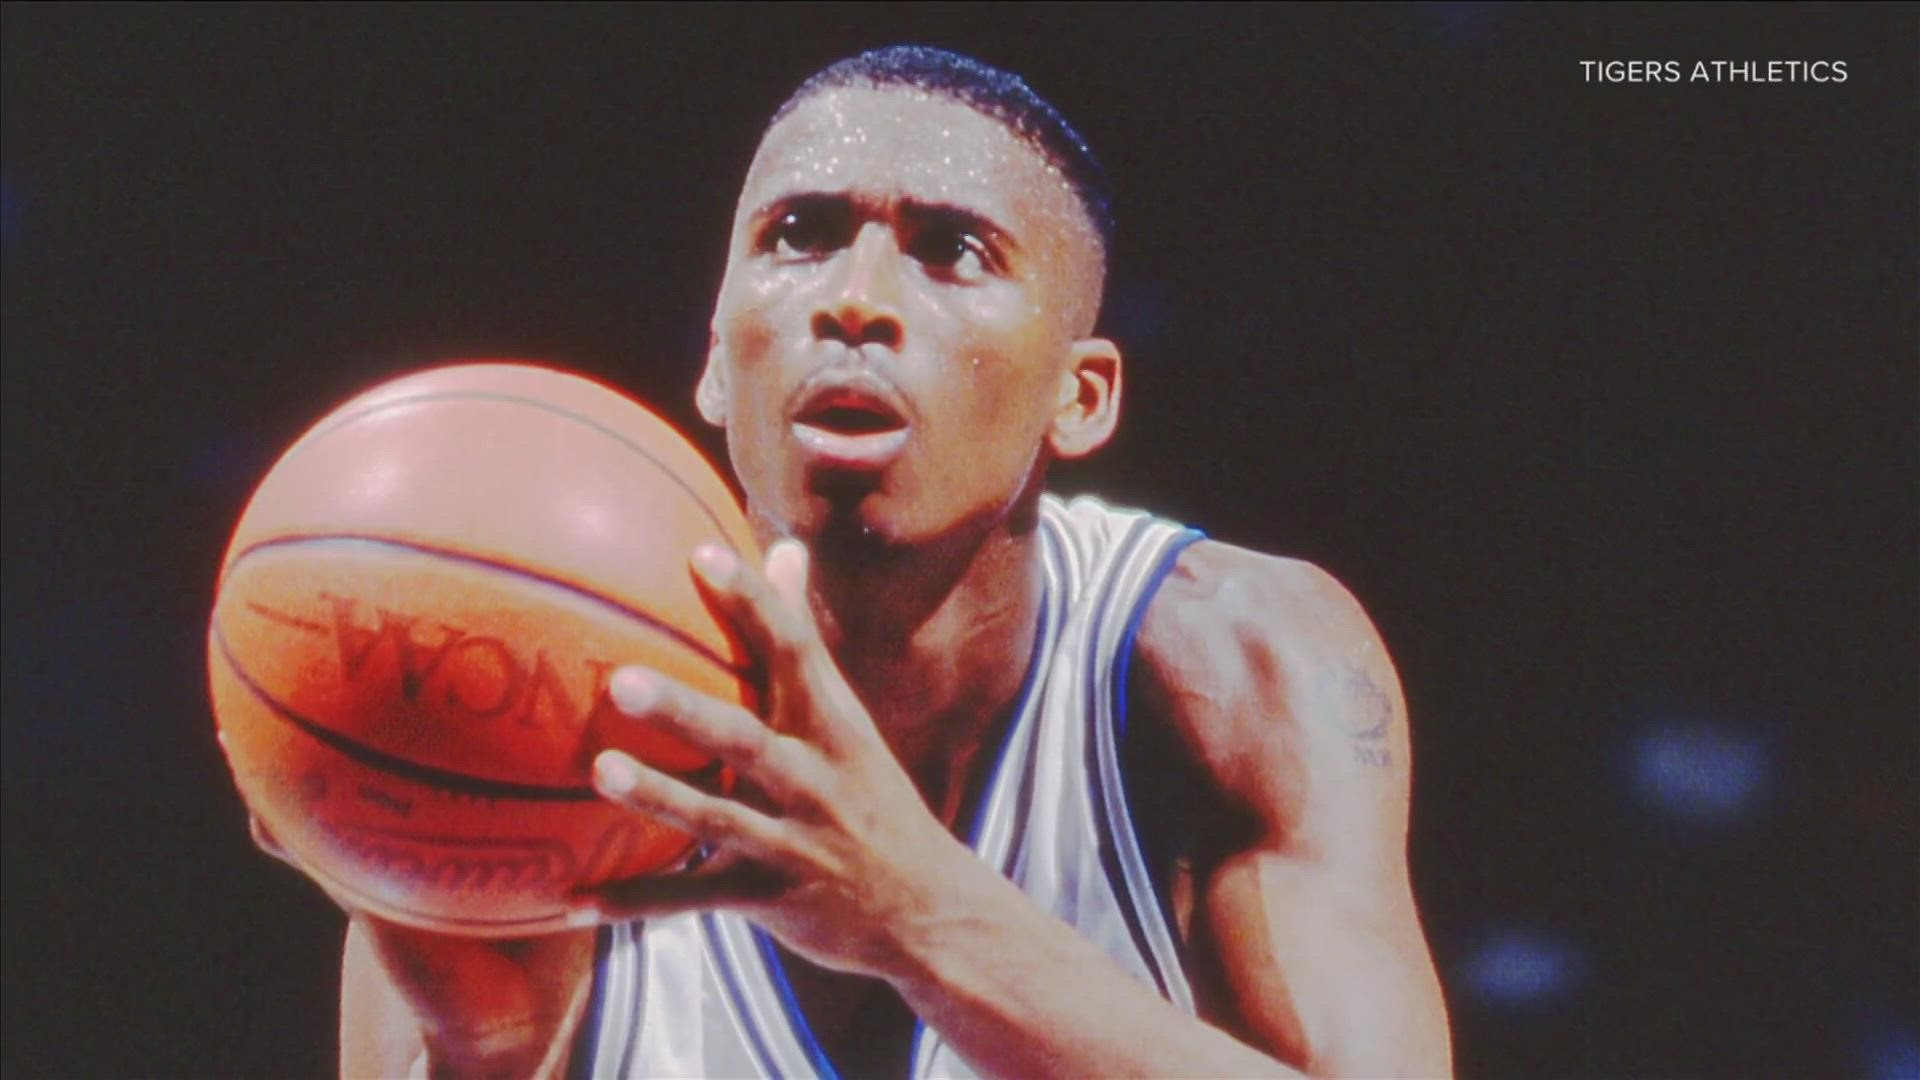 Wright played two seasons with the Tigers, earing All-America honors before going on to a 13-year NBA career.